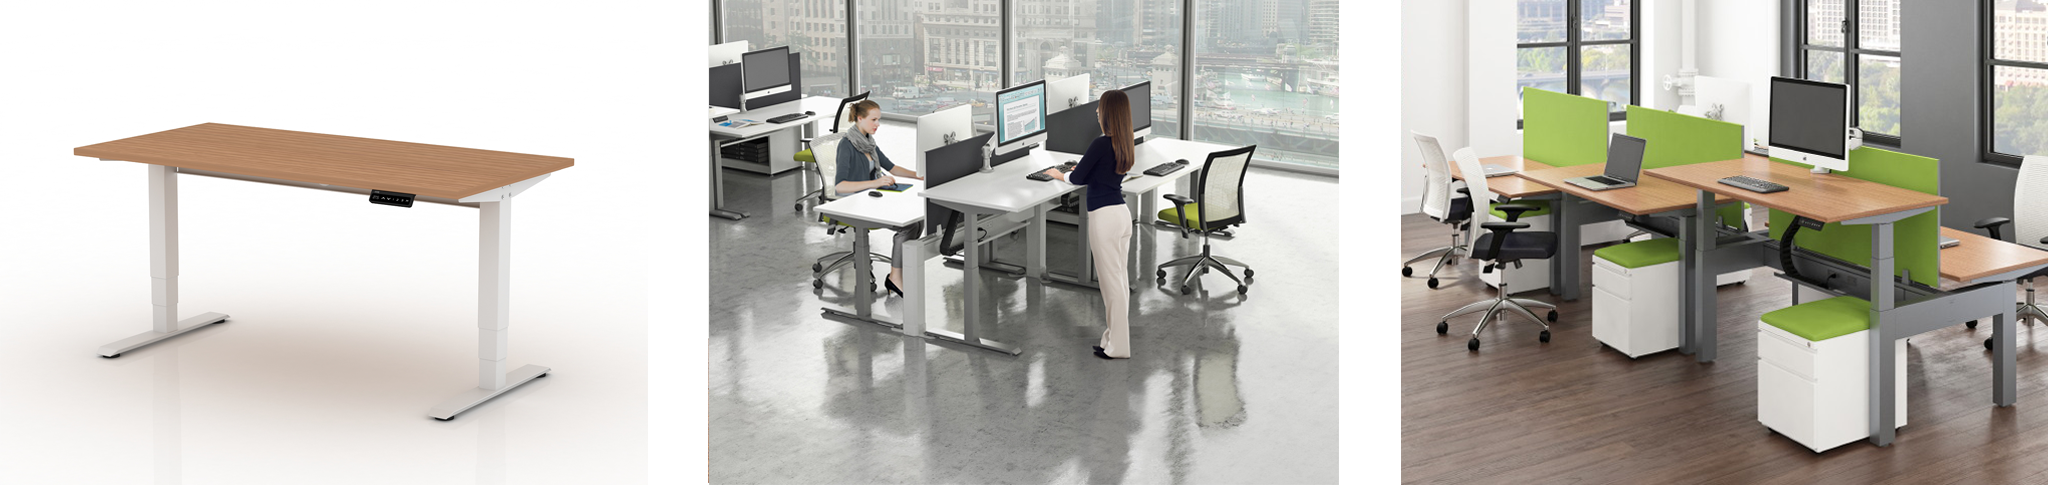 Office Furniture Heaven - Activ Height Adjustable Tables